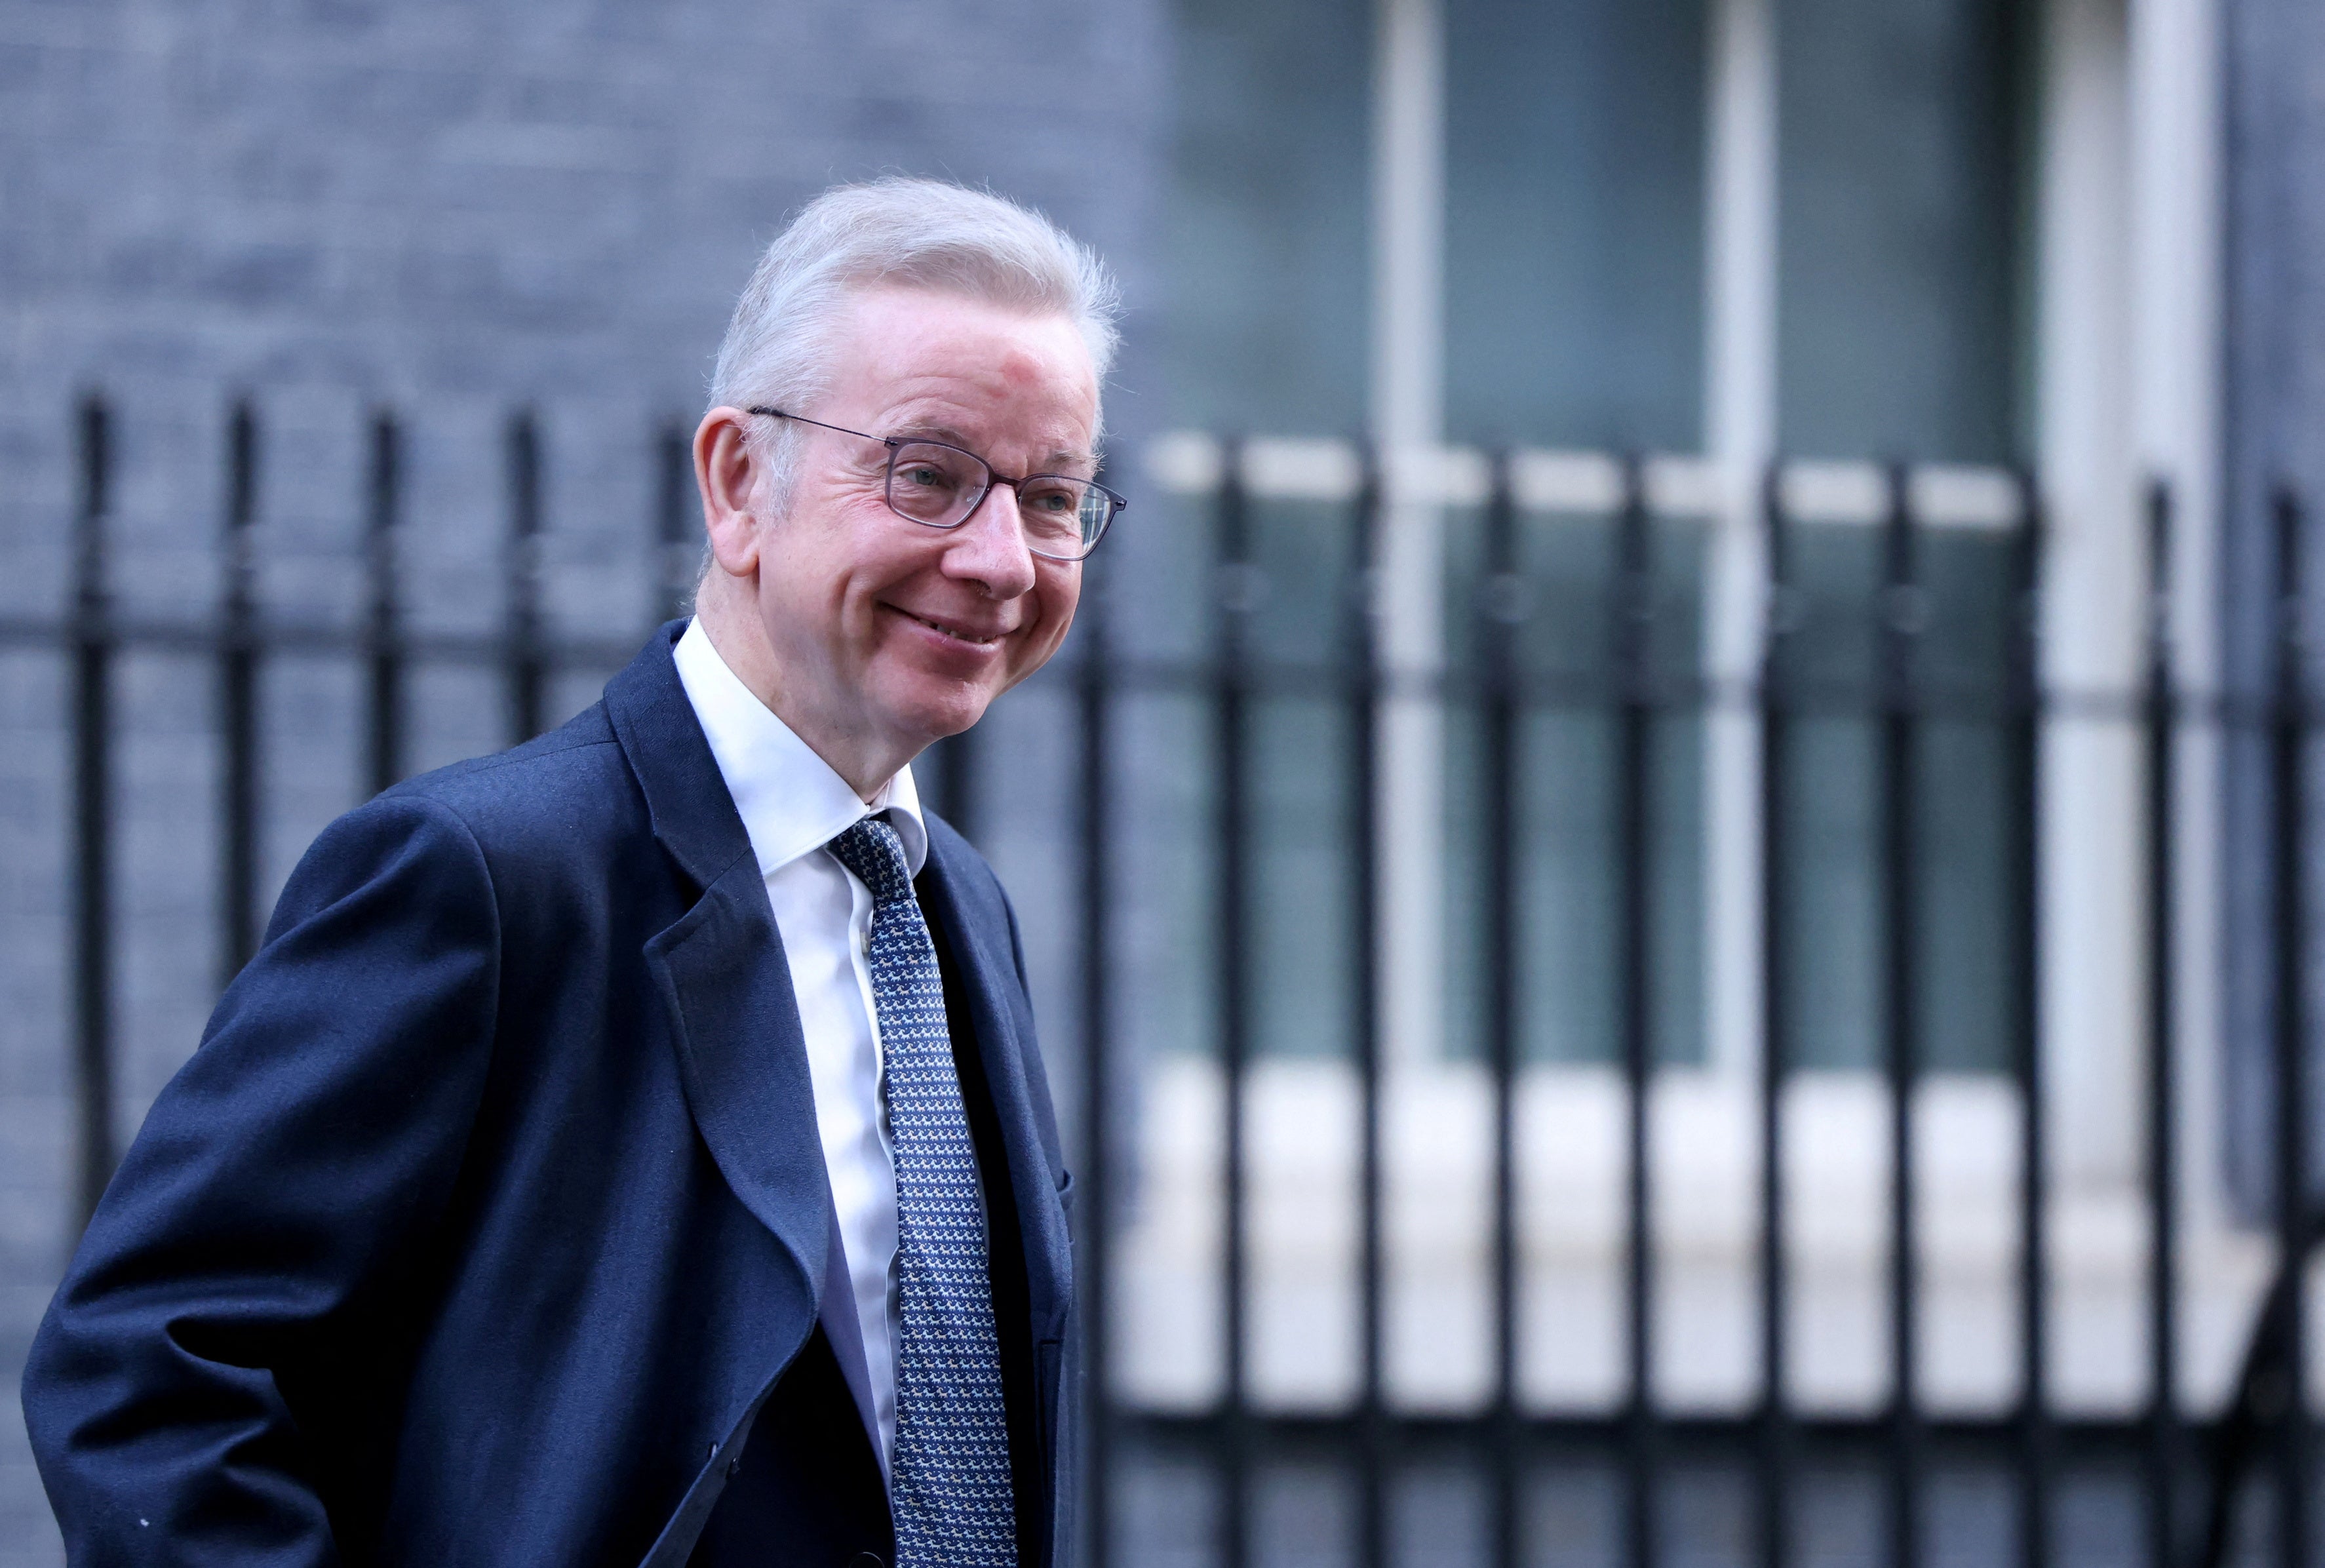 Sunak and his communities secretary Michael Gove under pressure from Tory MPs